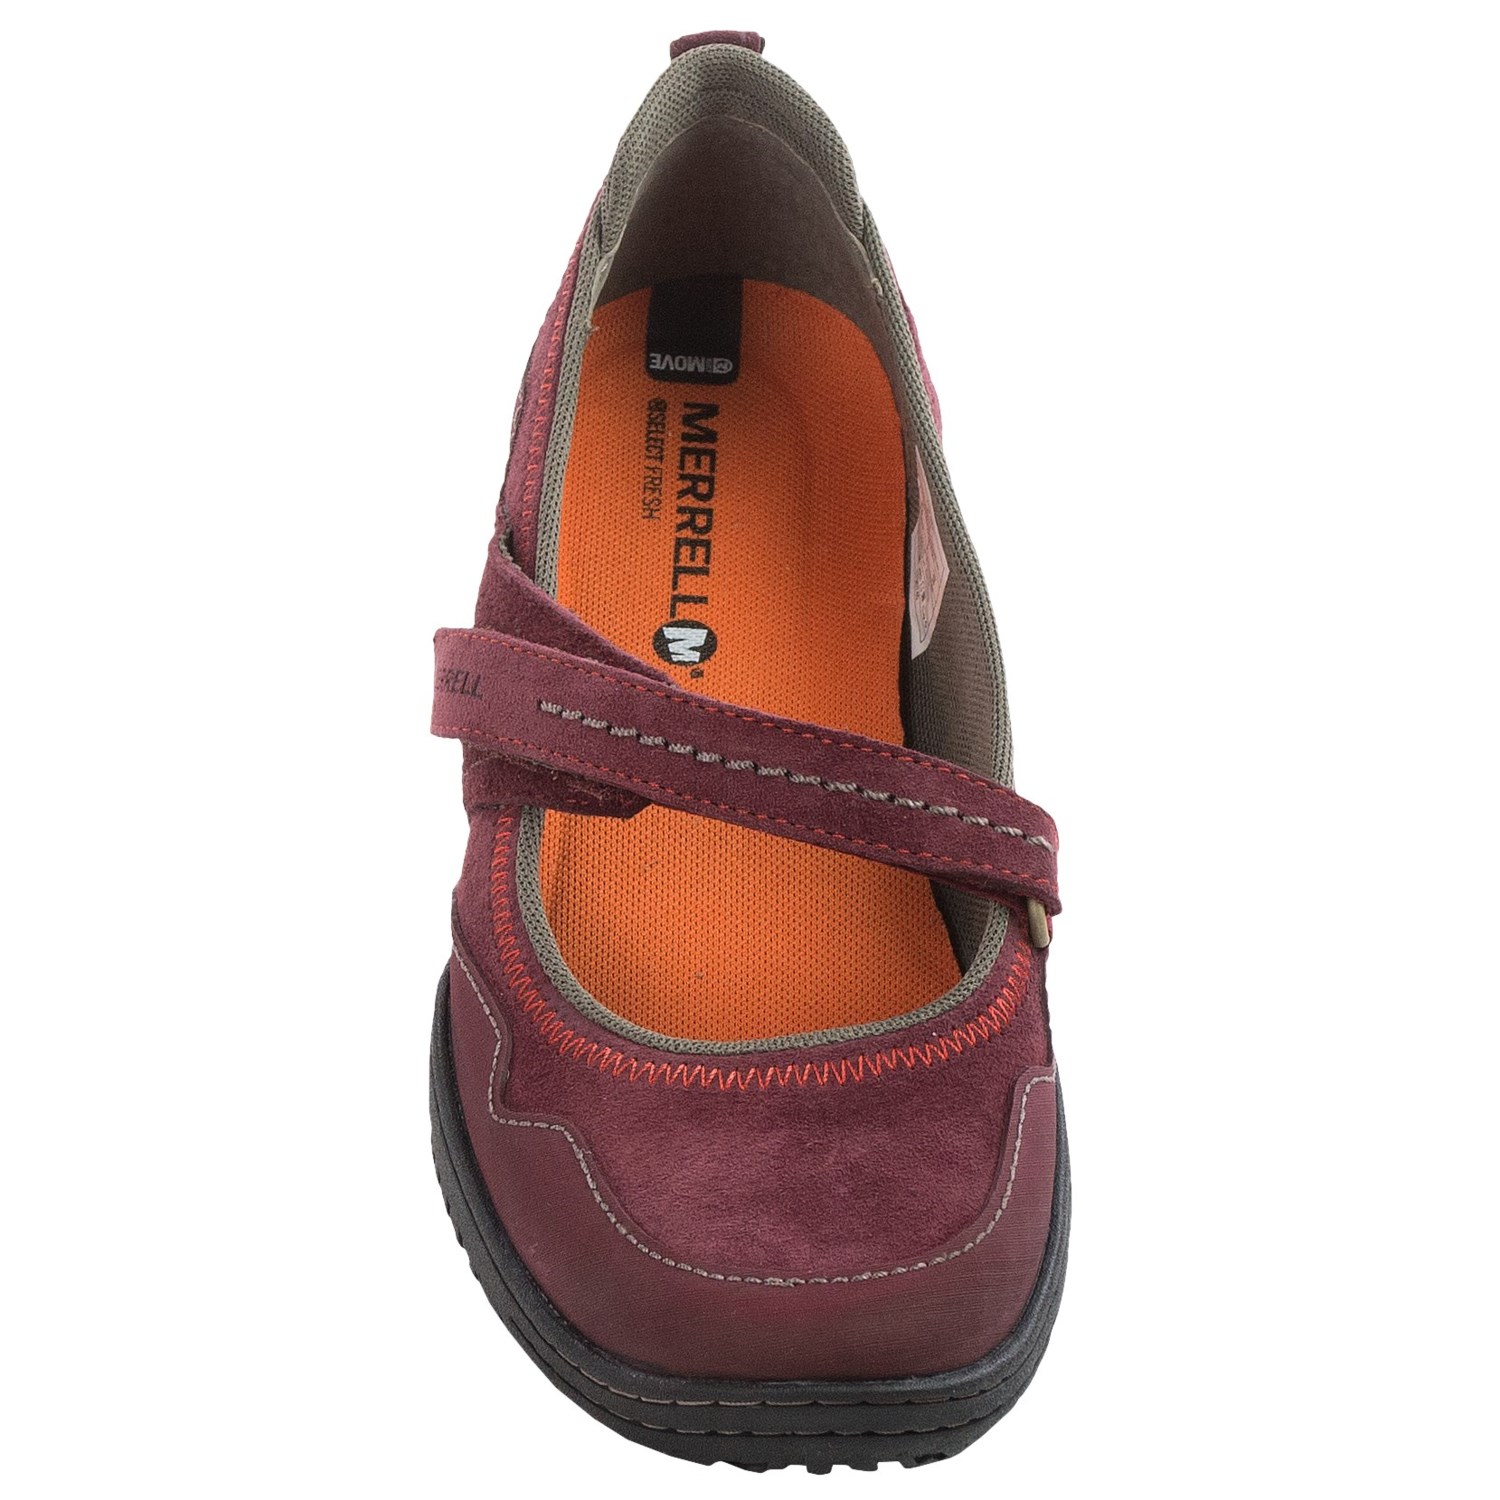 Merrell Albany Mary Jane Shoes (For Women) - Save 30%